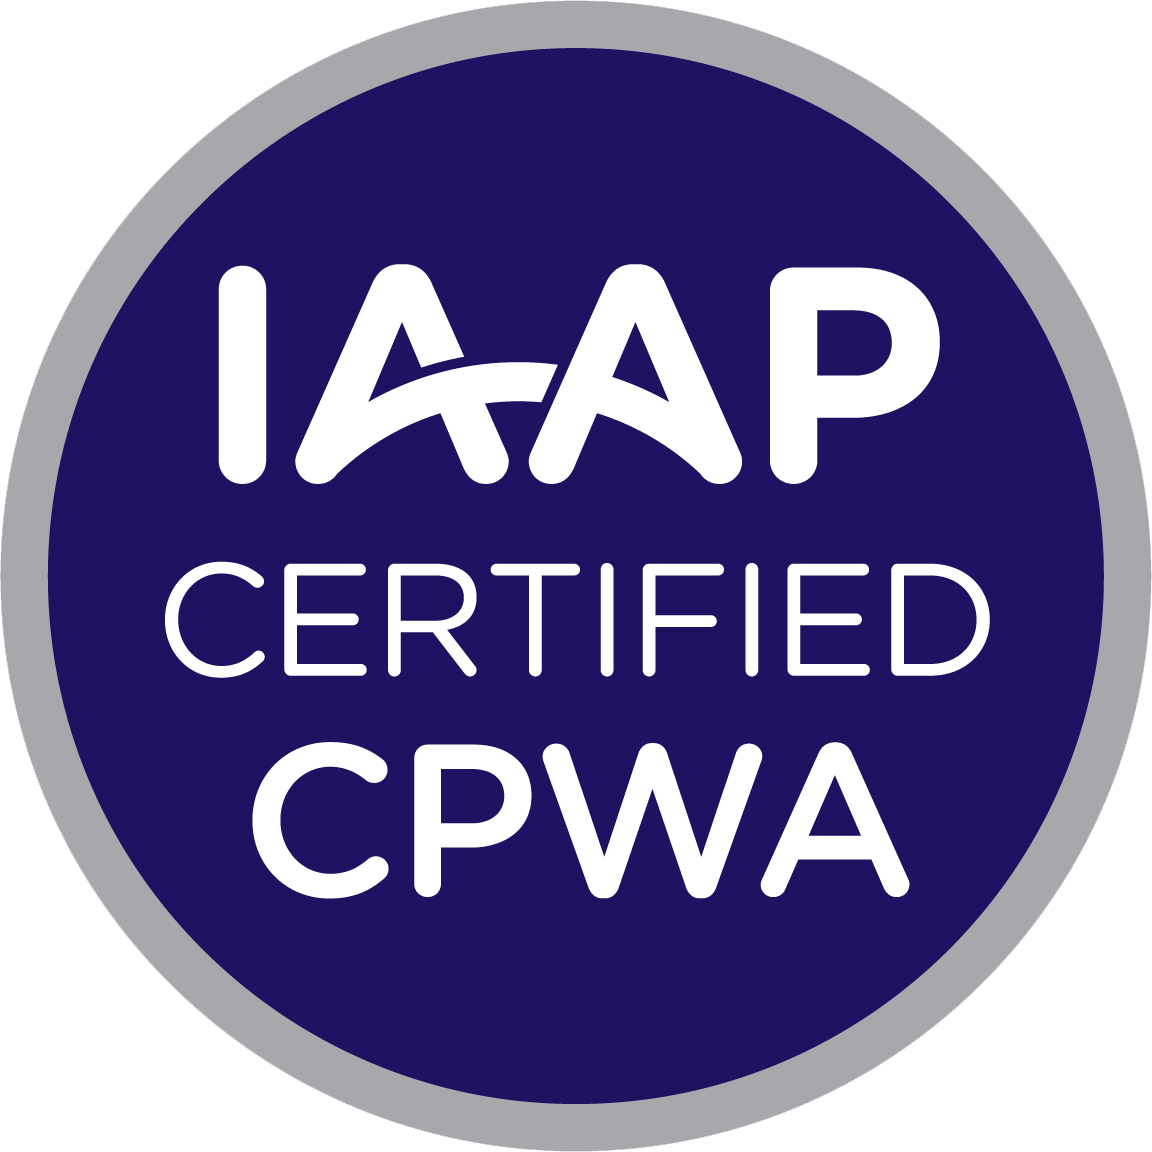 IAAP Certified CPWA (Certified Professional in Web Accessibility)